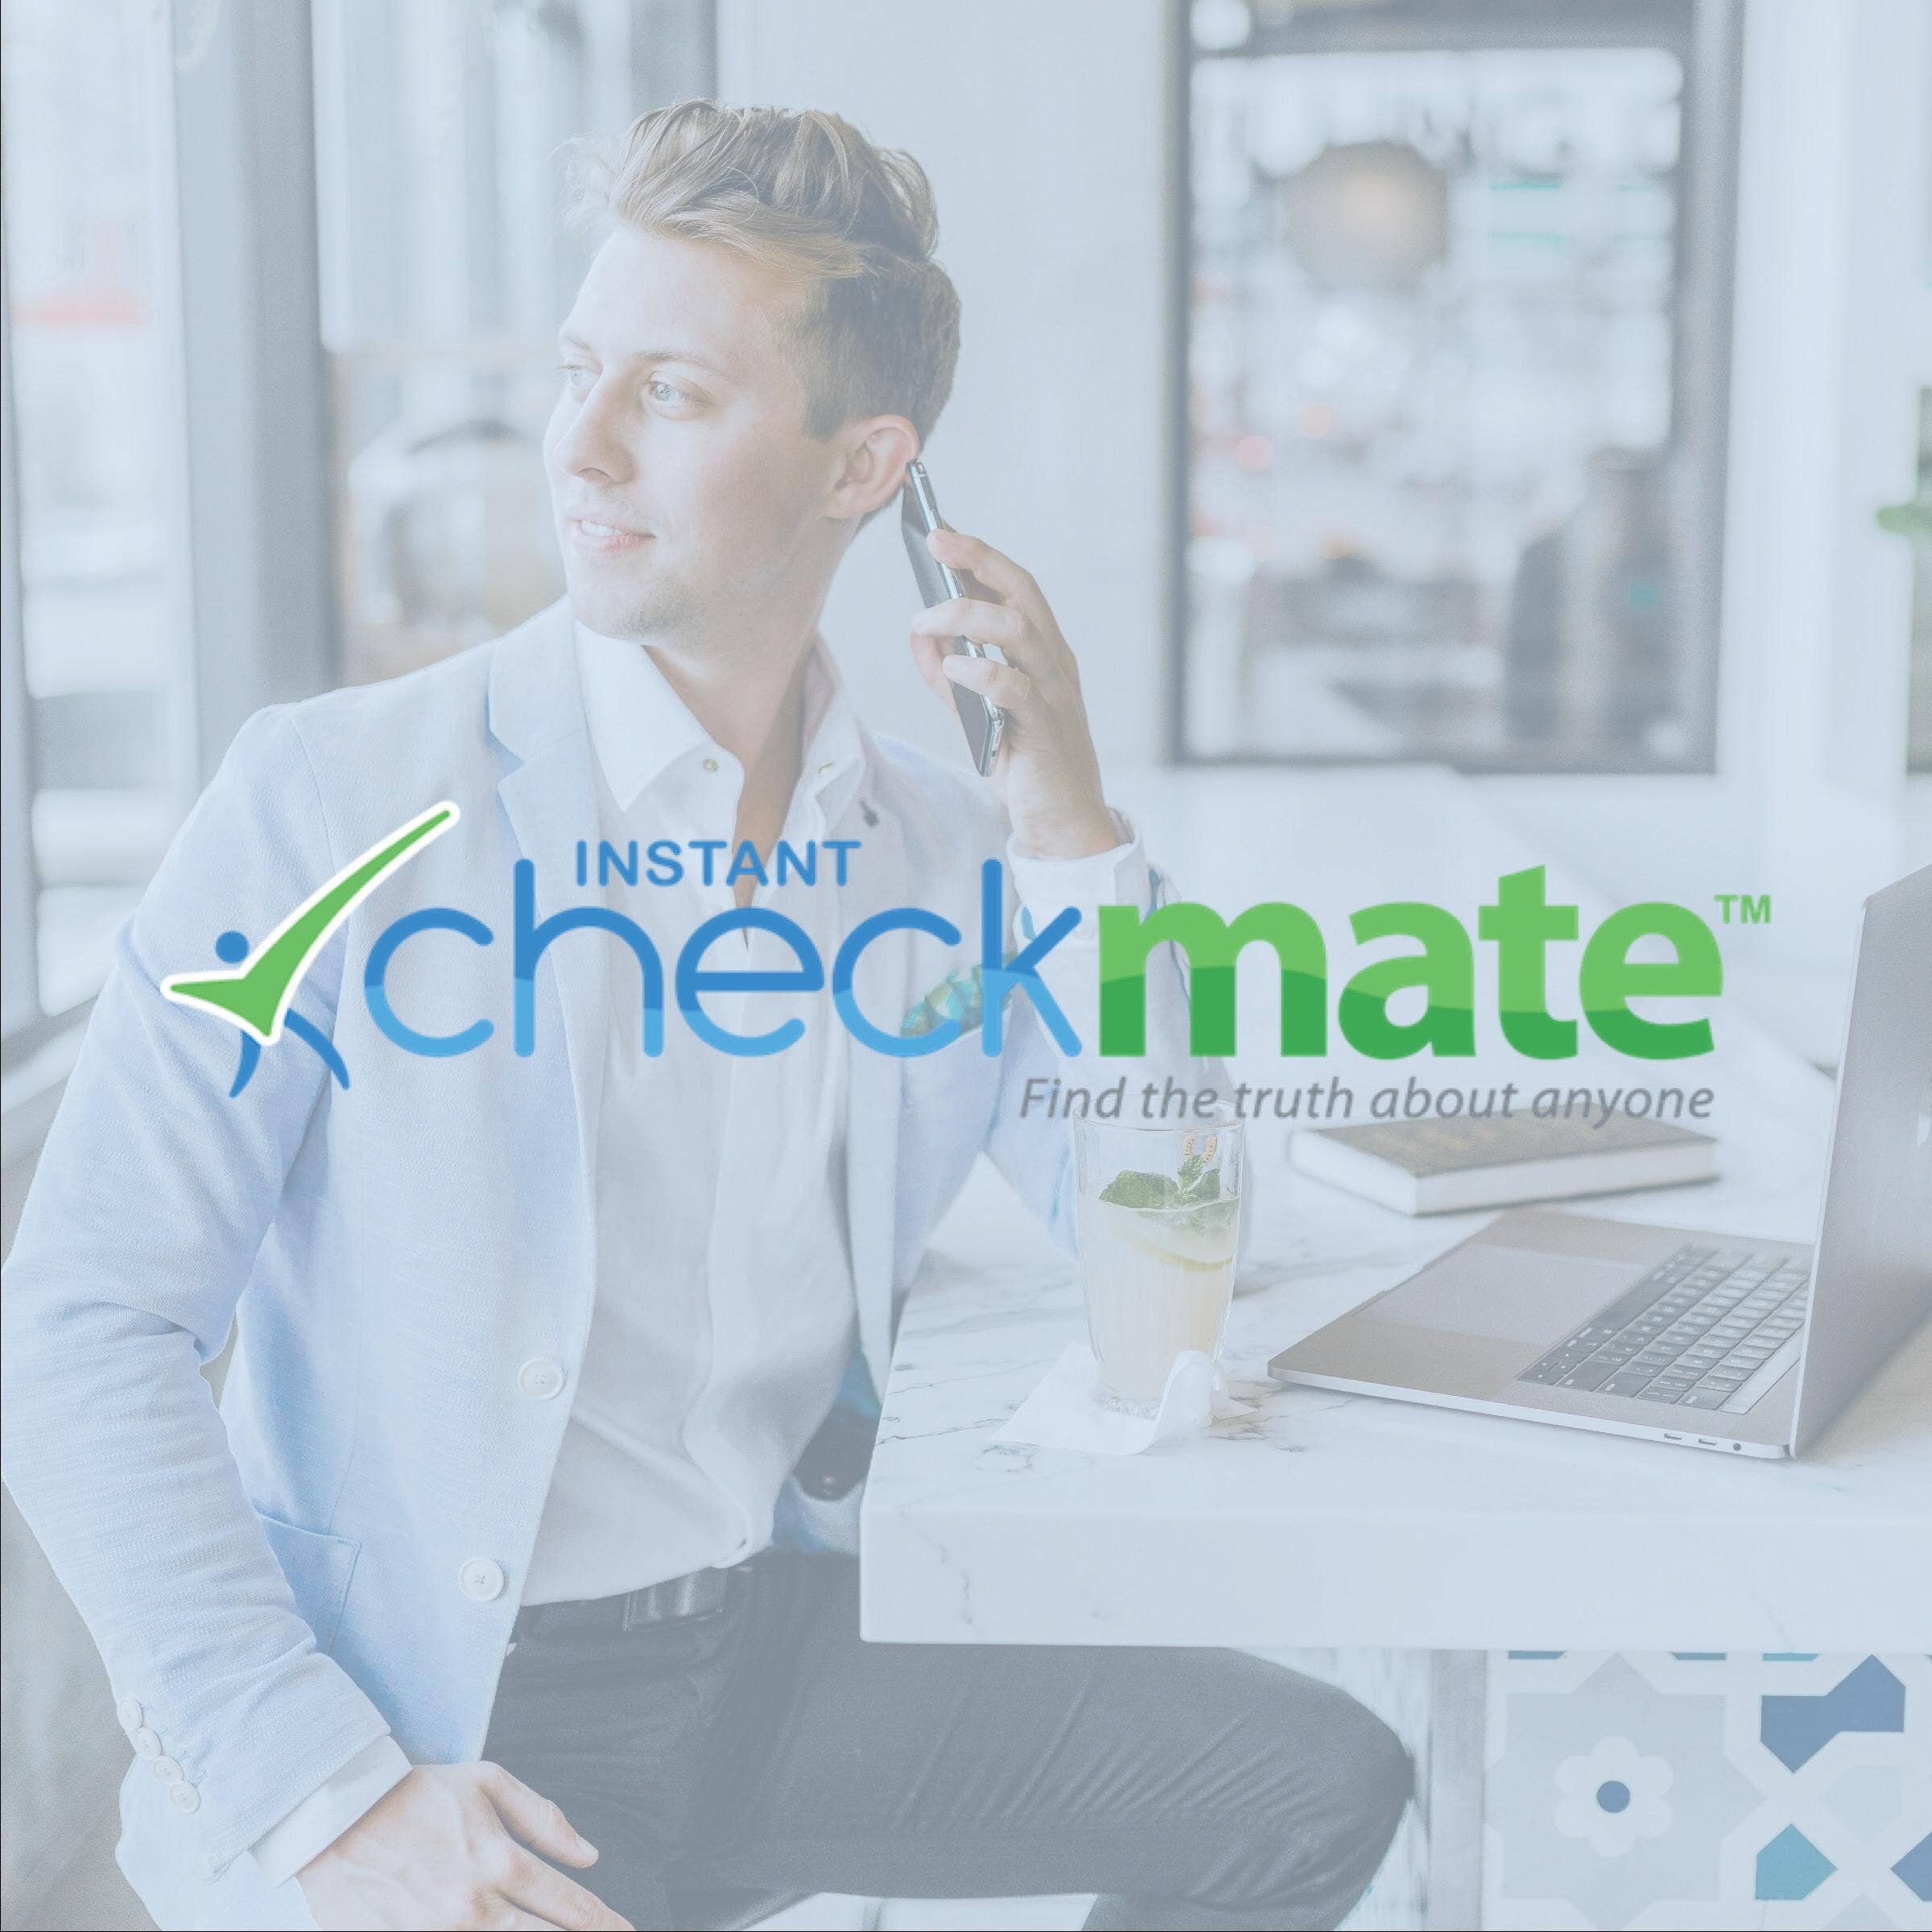 phone instant checkmate review